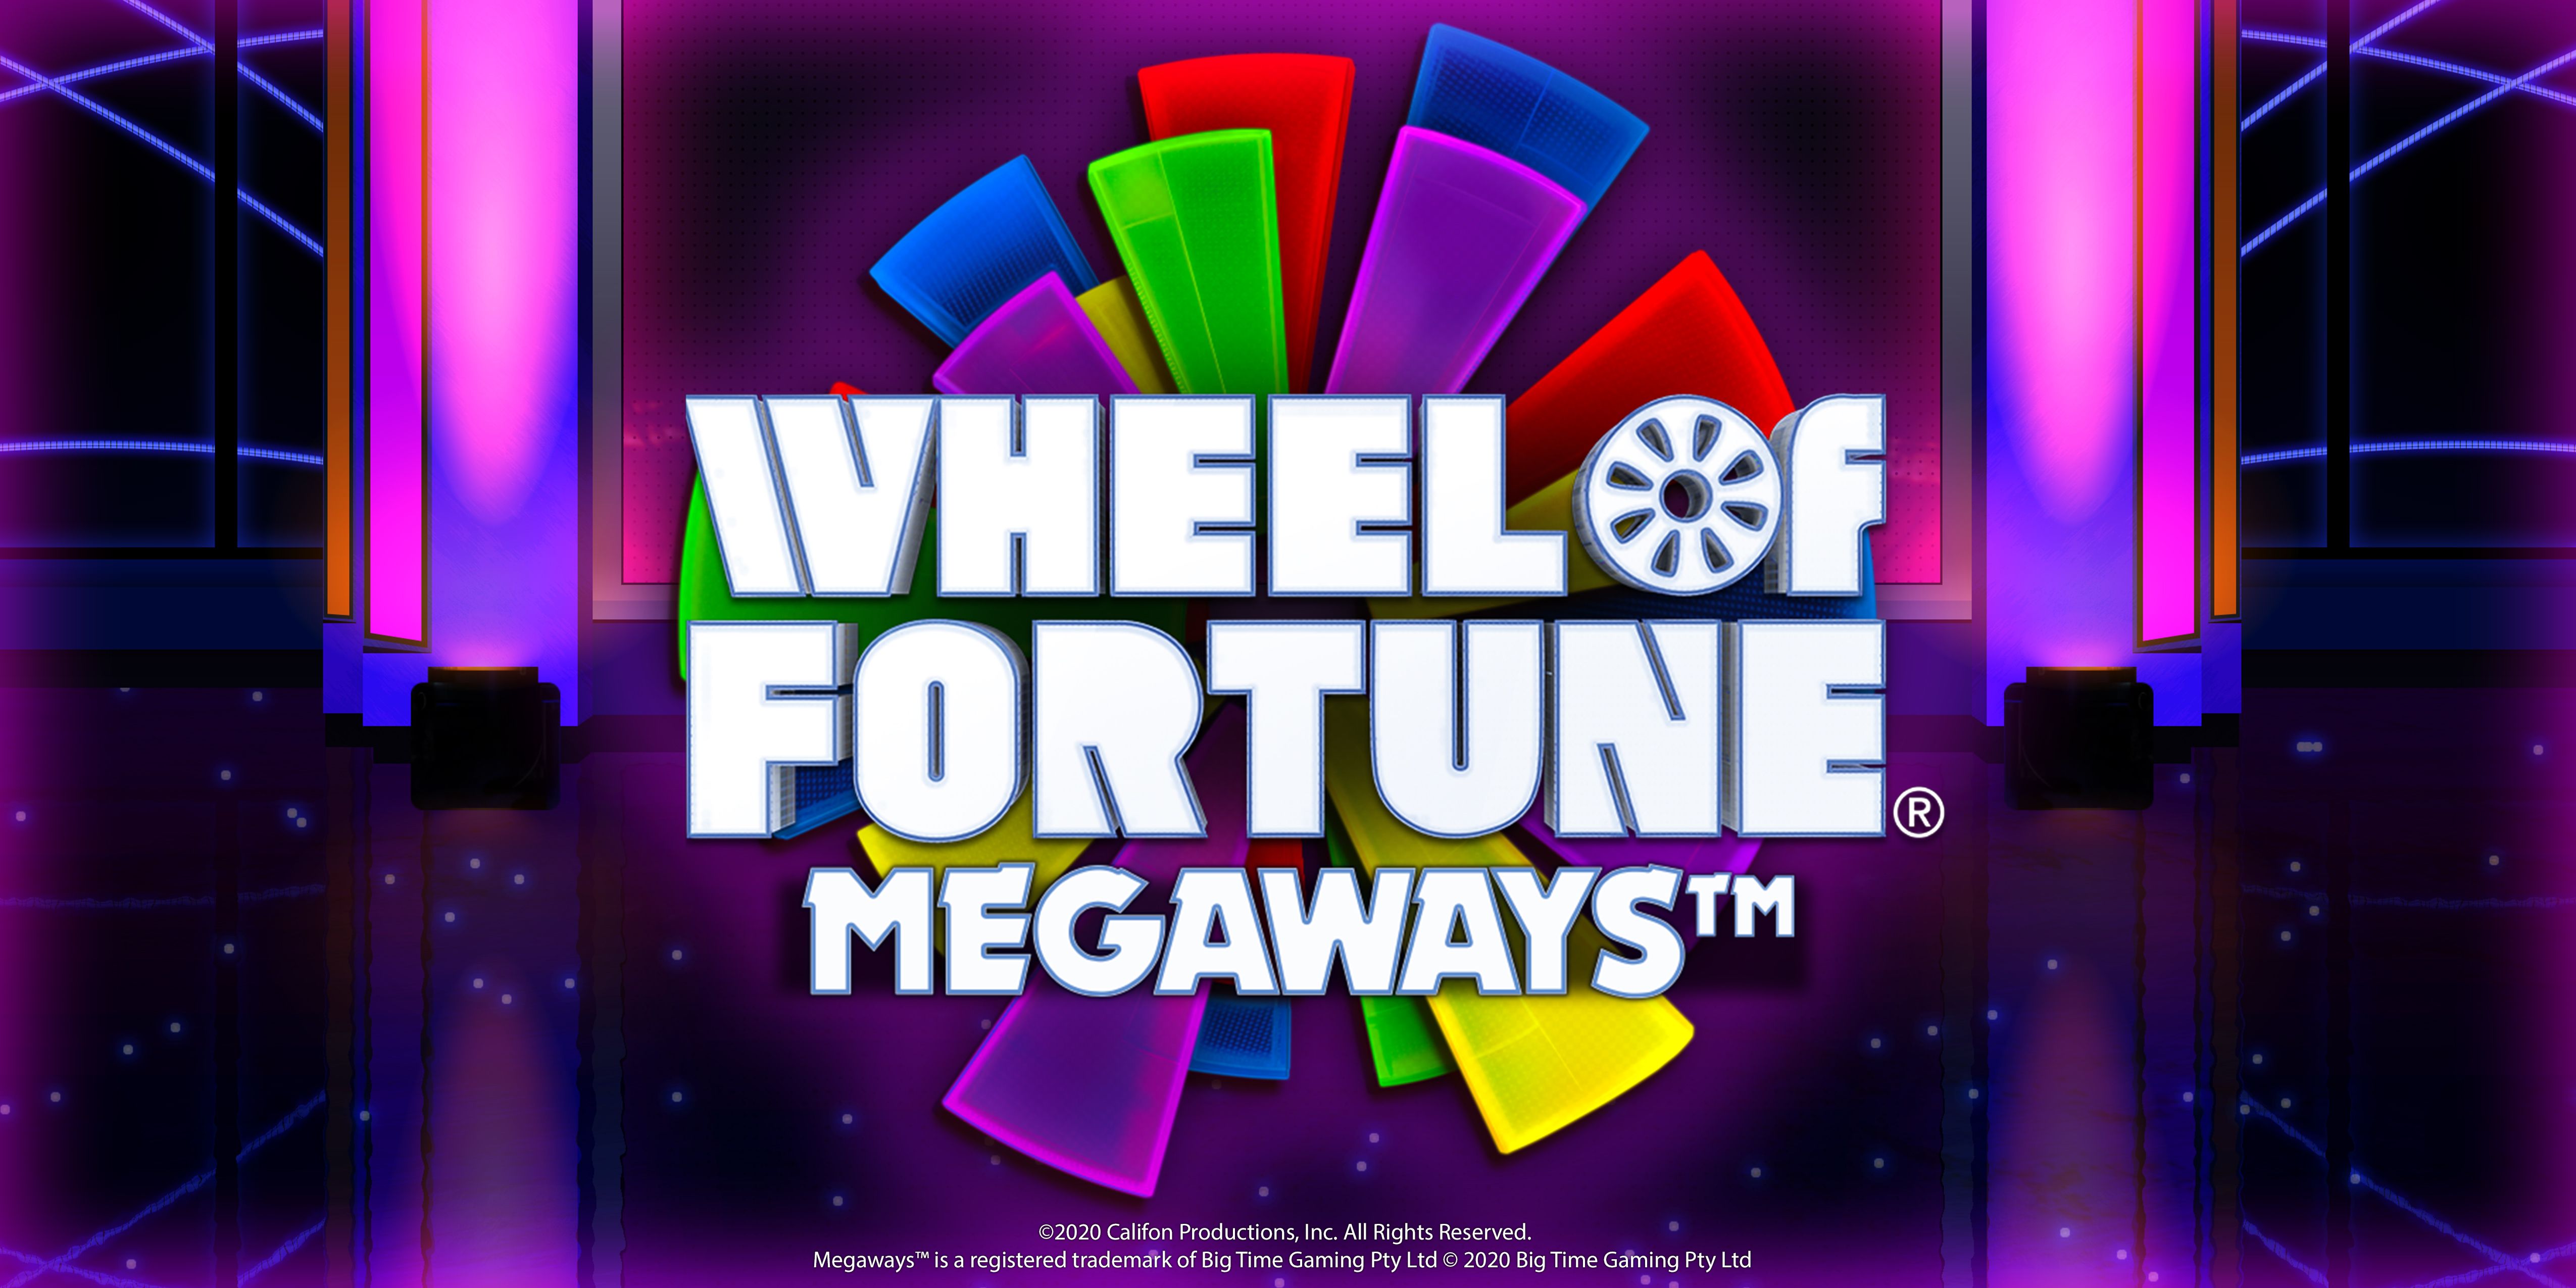 free slots no download wheel of fortune